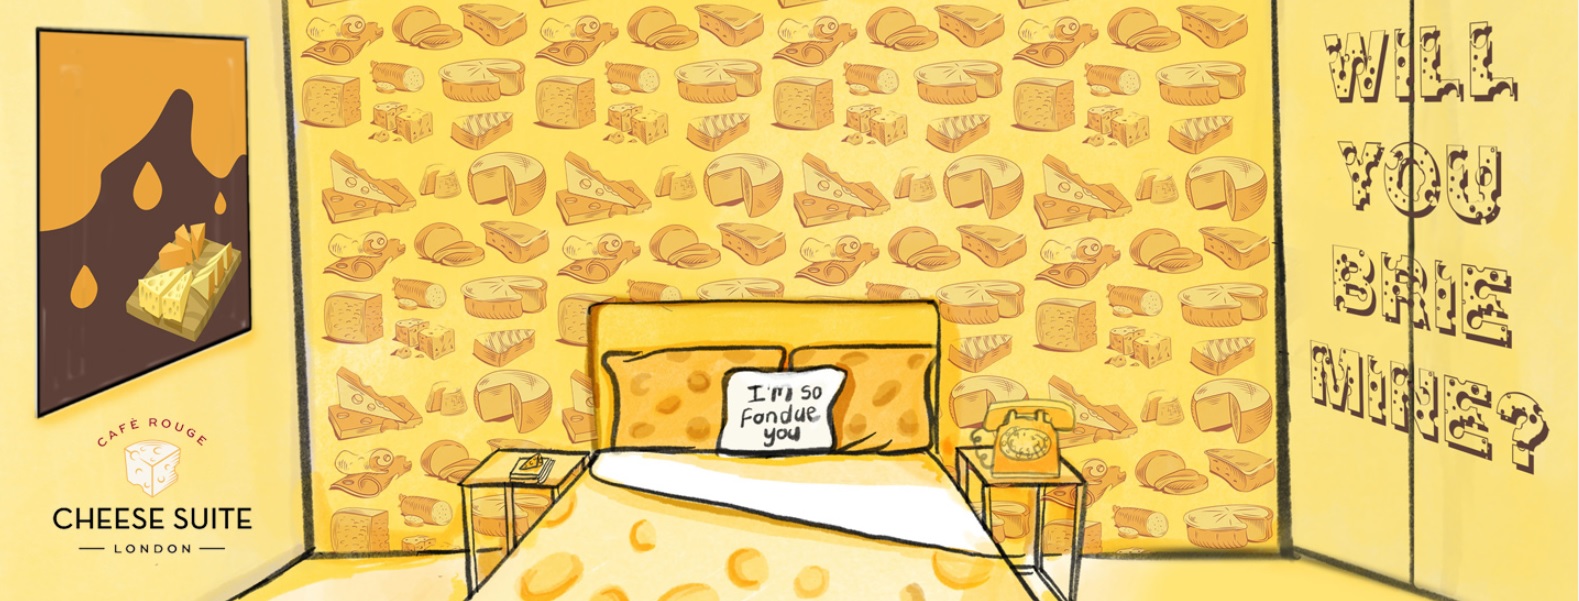 cheese-hotel-cheesy-suite